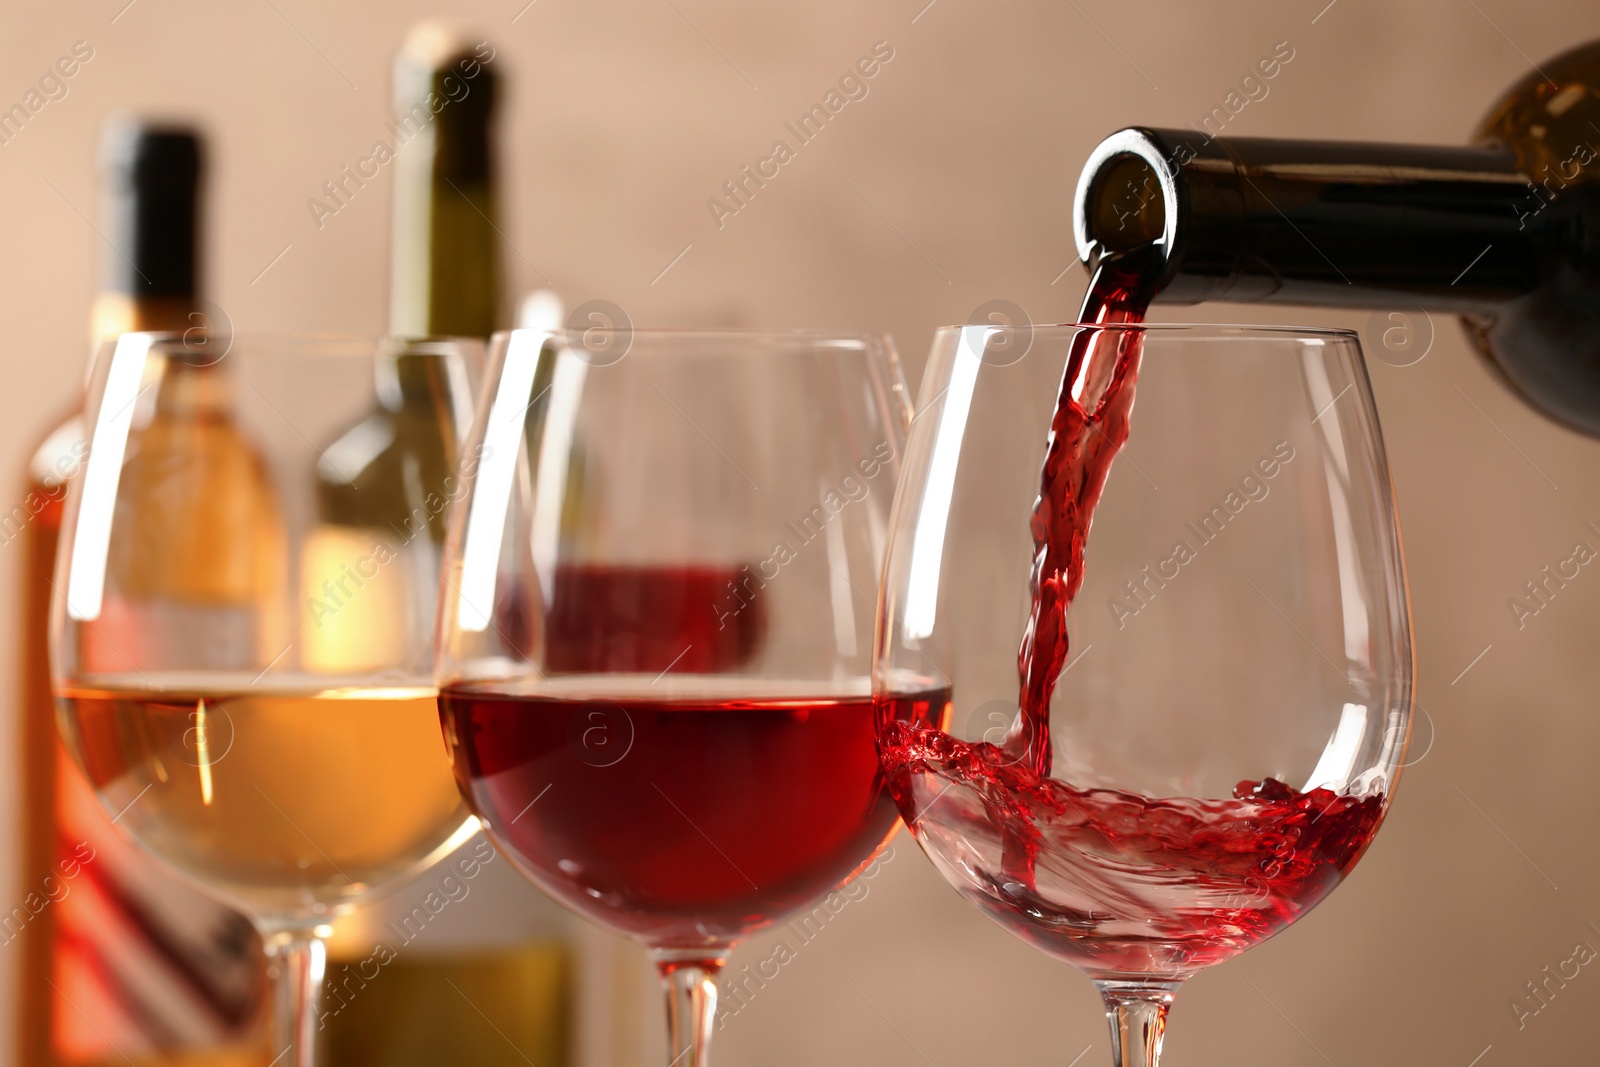 Photo of Pouring wine from bottle into glass on blurred background, closeup